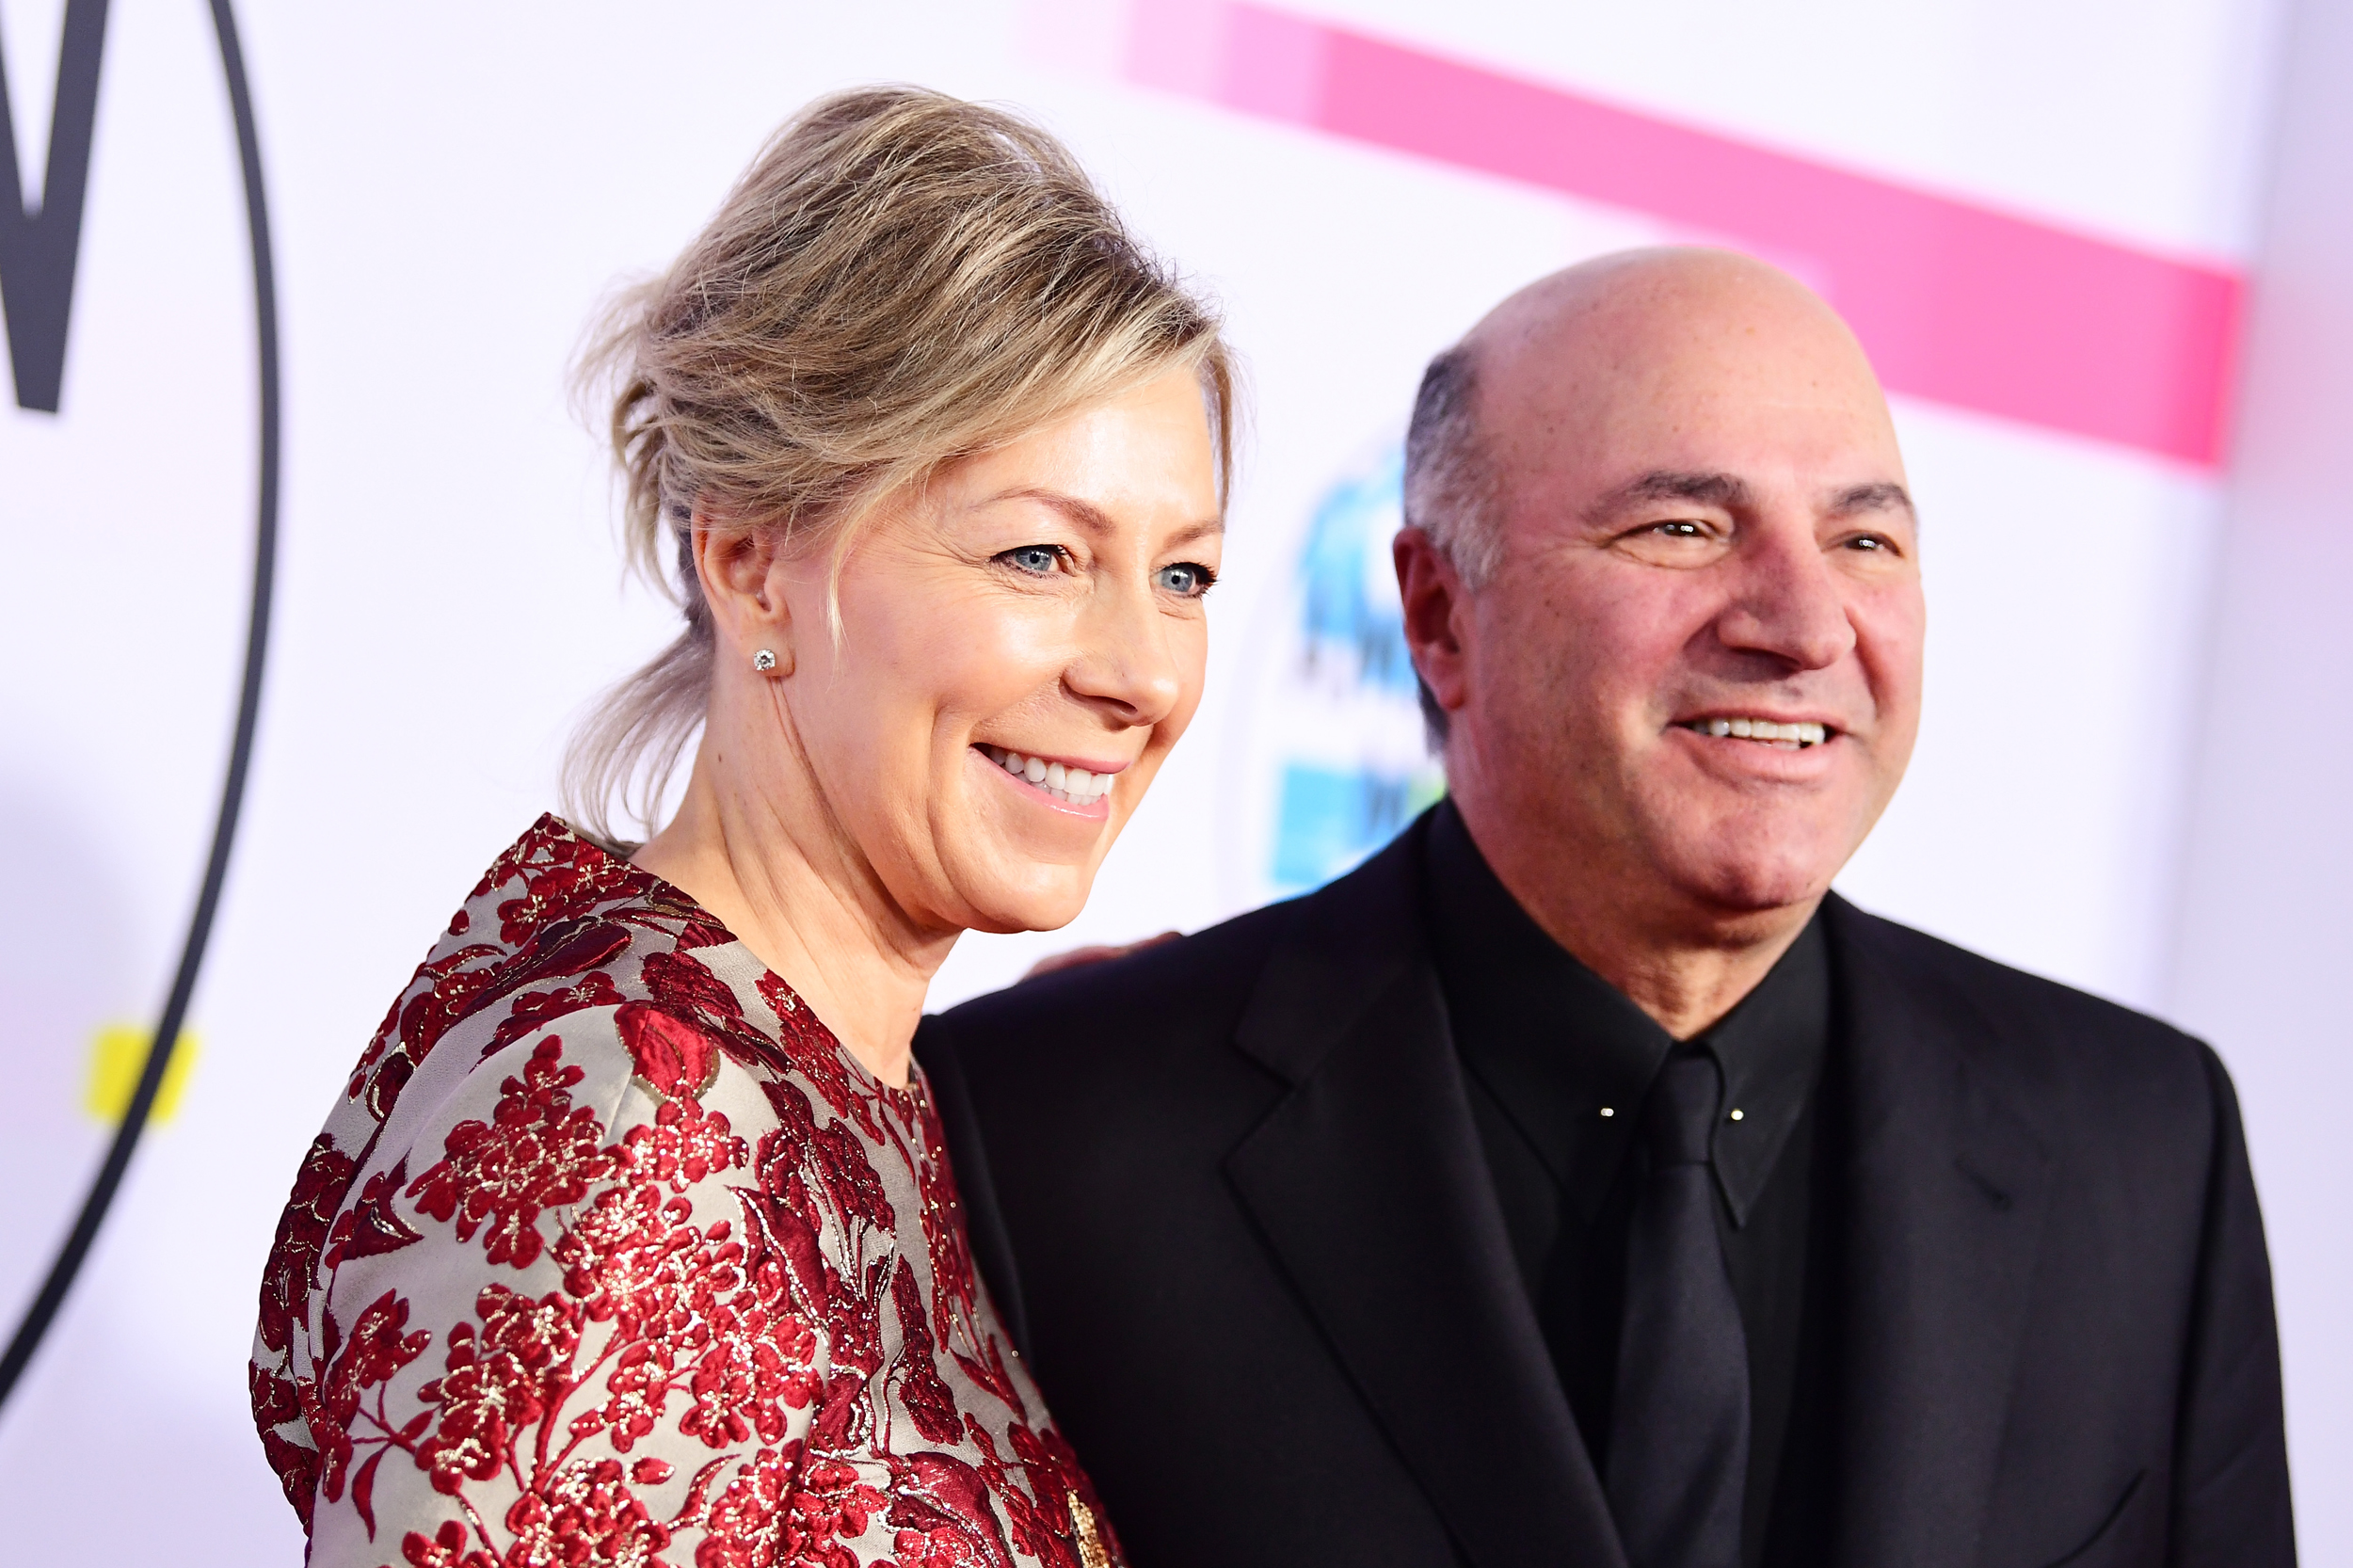 Kevin O Leary and Wife Linda O Leary Boat Accident And What to Know So Far About The Shark Tank Star!